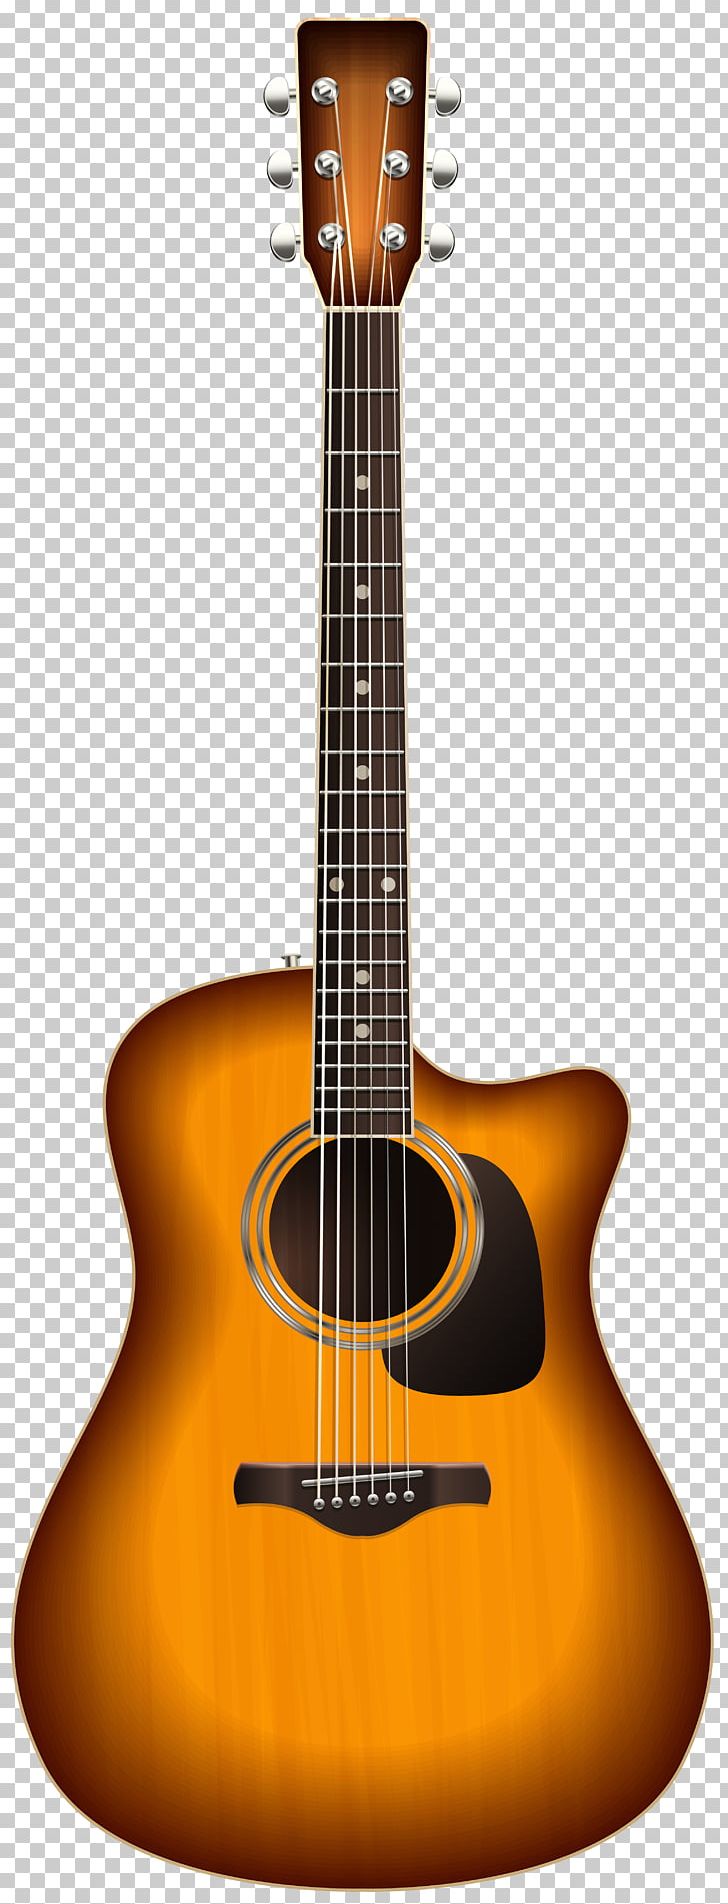 Classical Guitar String Instruments Electric Guitar PNG, Clipart, Acoustic Electric Guitar, Cavaquinho, Cuatro, Guitar, Guitar Accessory Free PNG Download